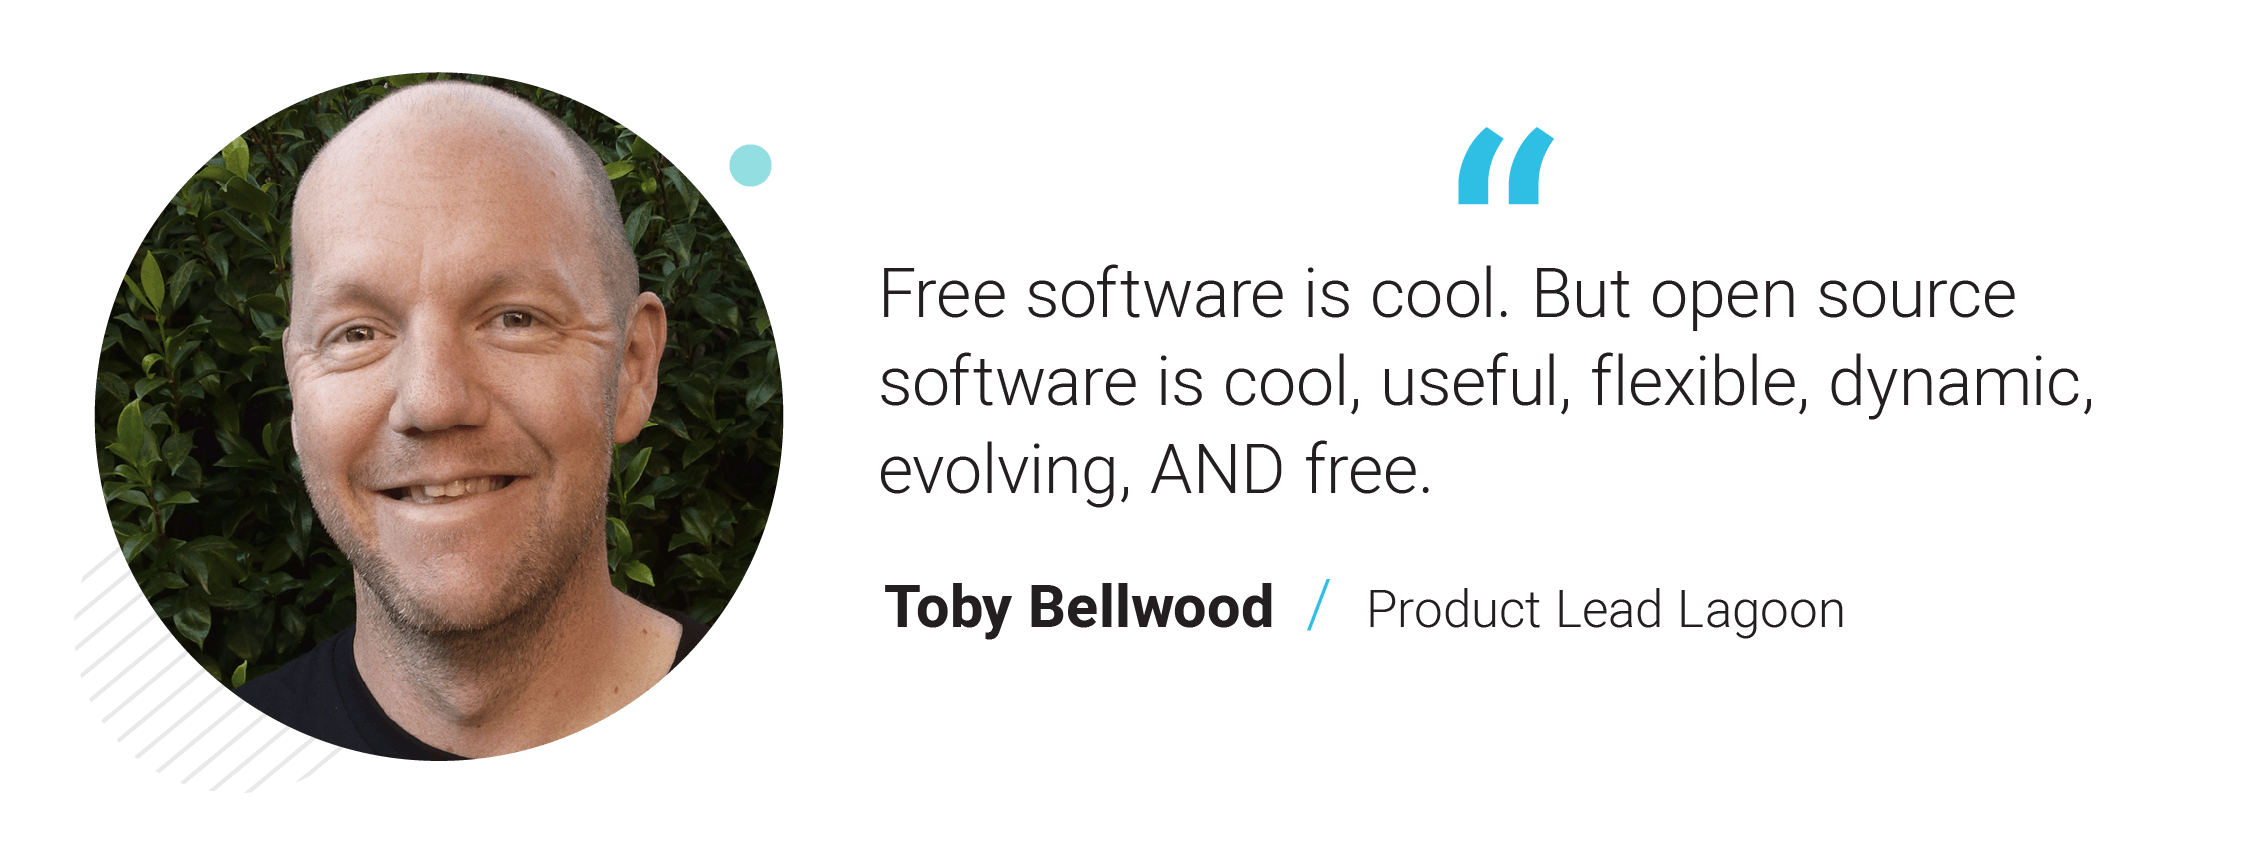 Free software is cool. But open source software is cool, useful, flexible, dynamic, evolving, AND free. - Toby Bellwood, Product Lead Lagoon